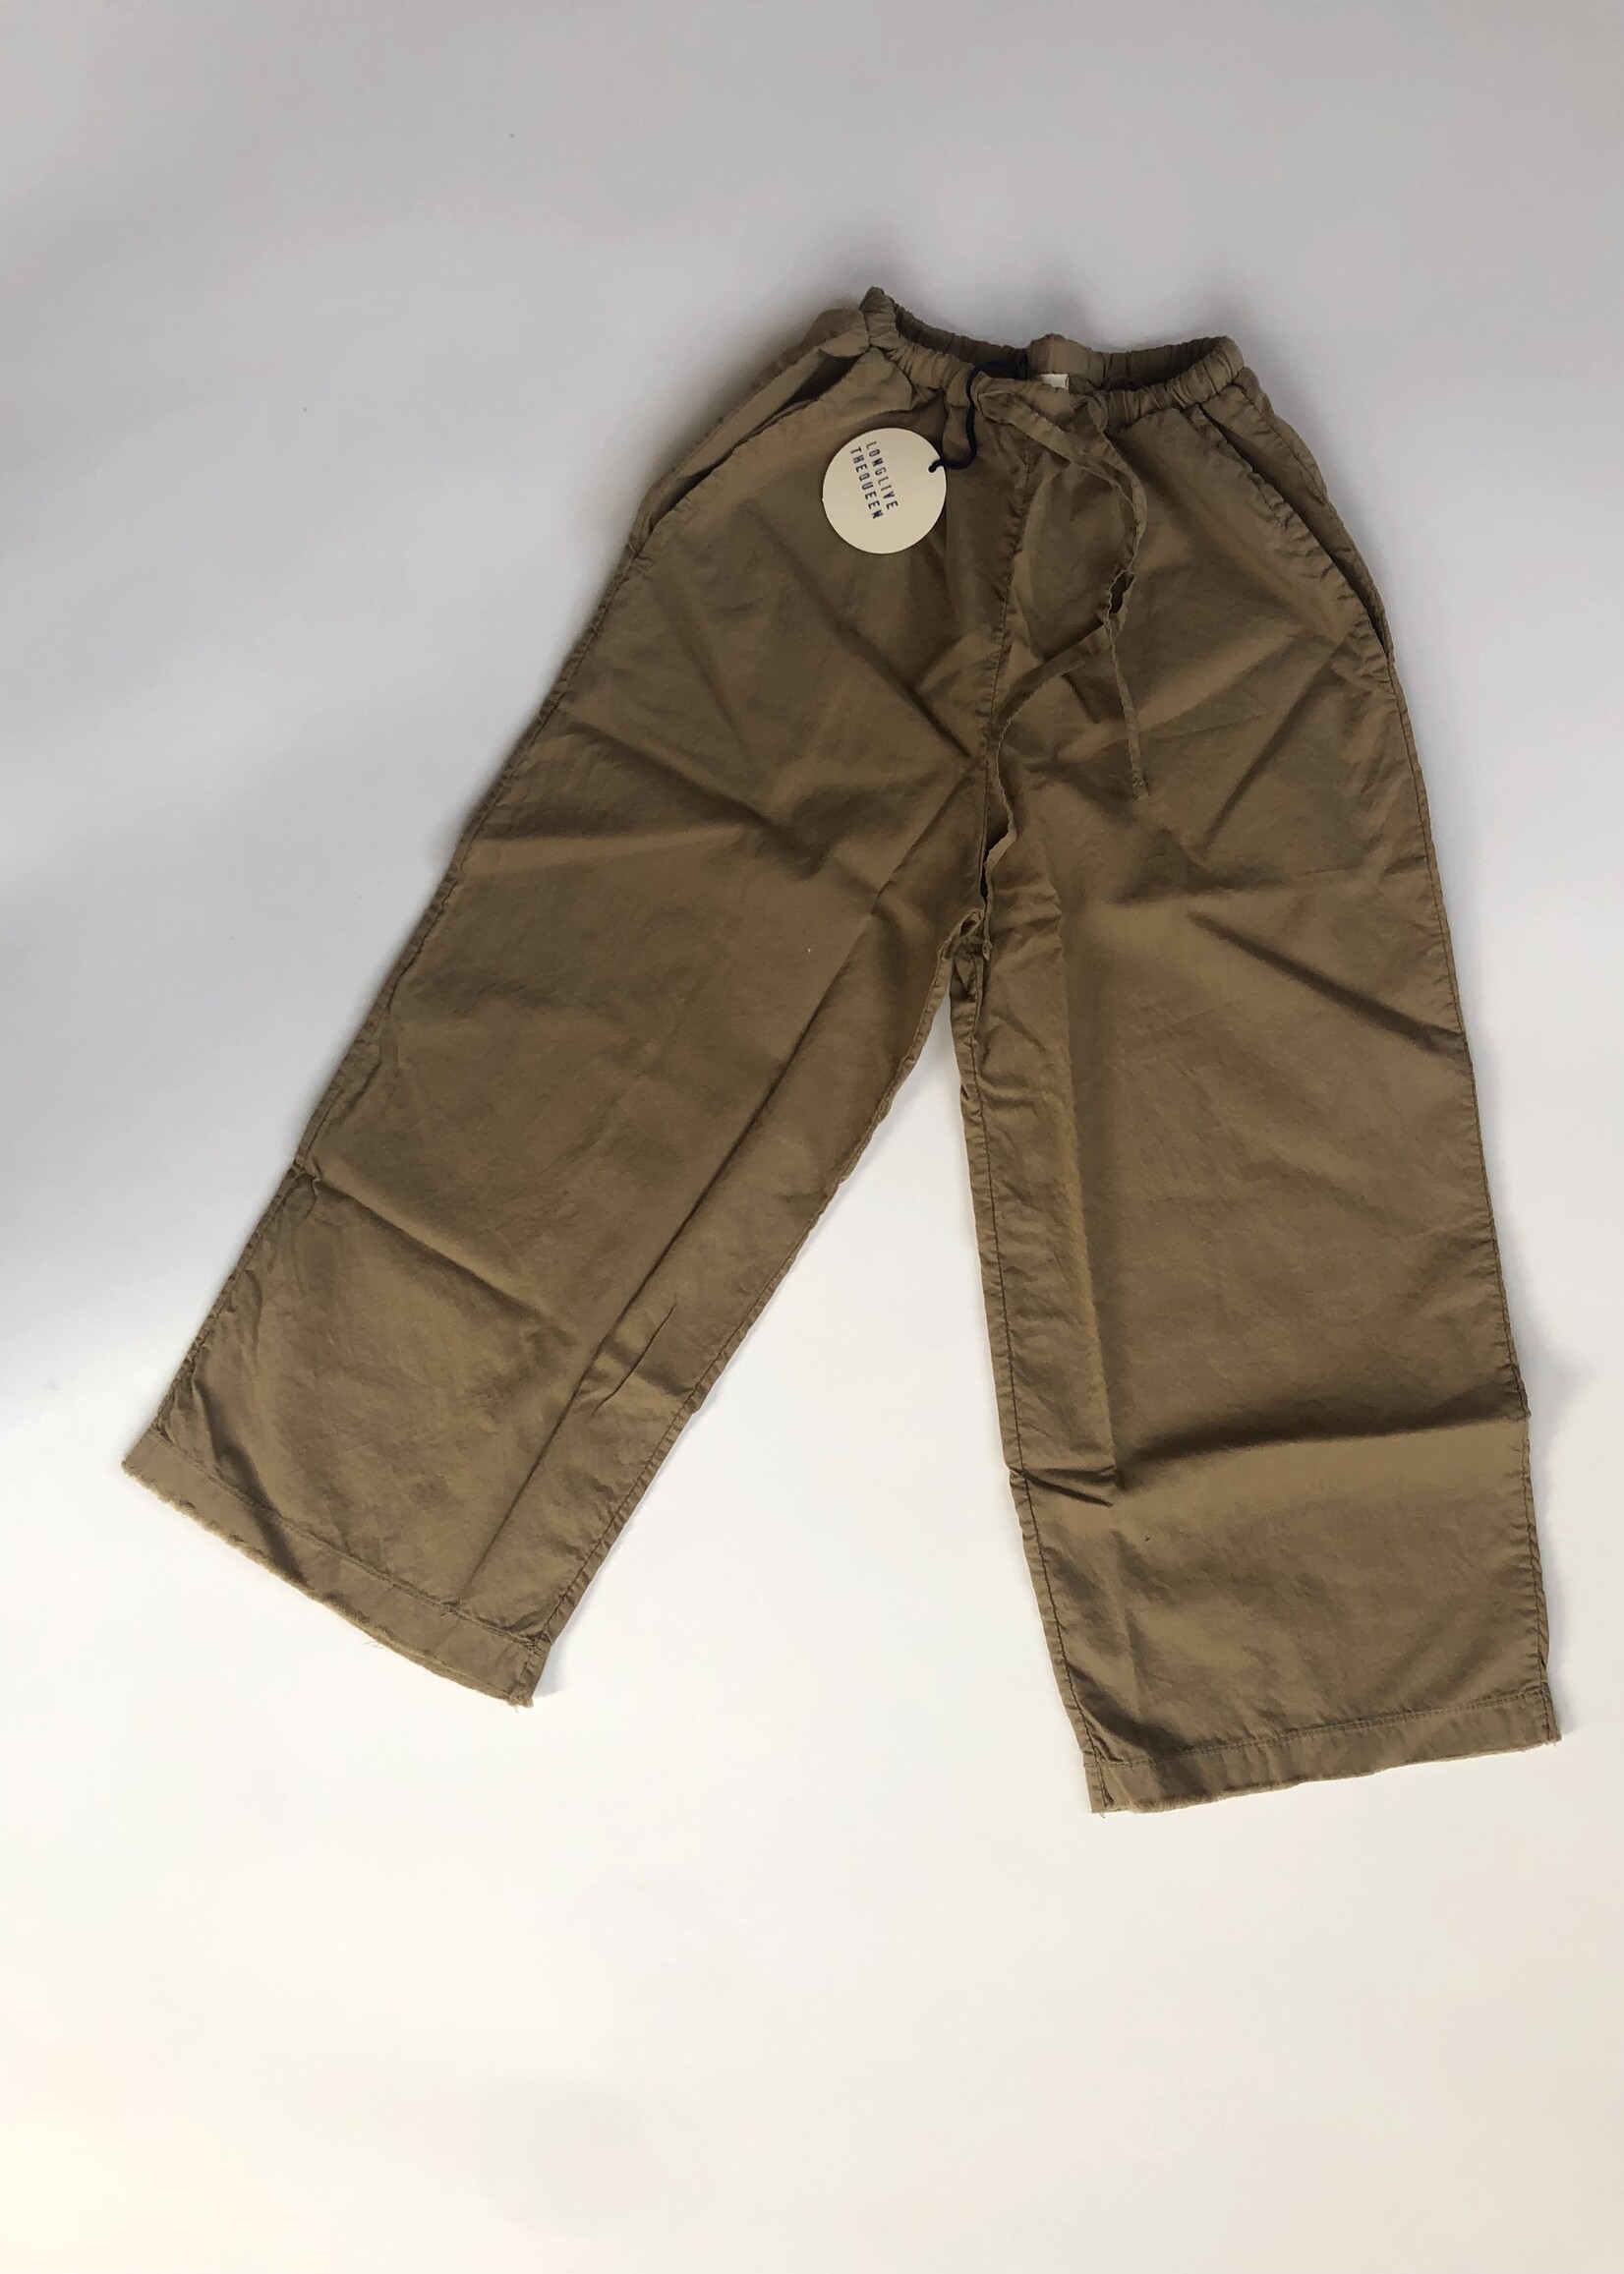 Long Live The Queen Khaki green wide fit pants 4y